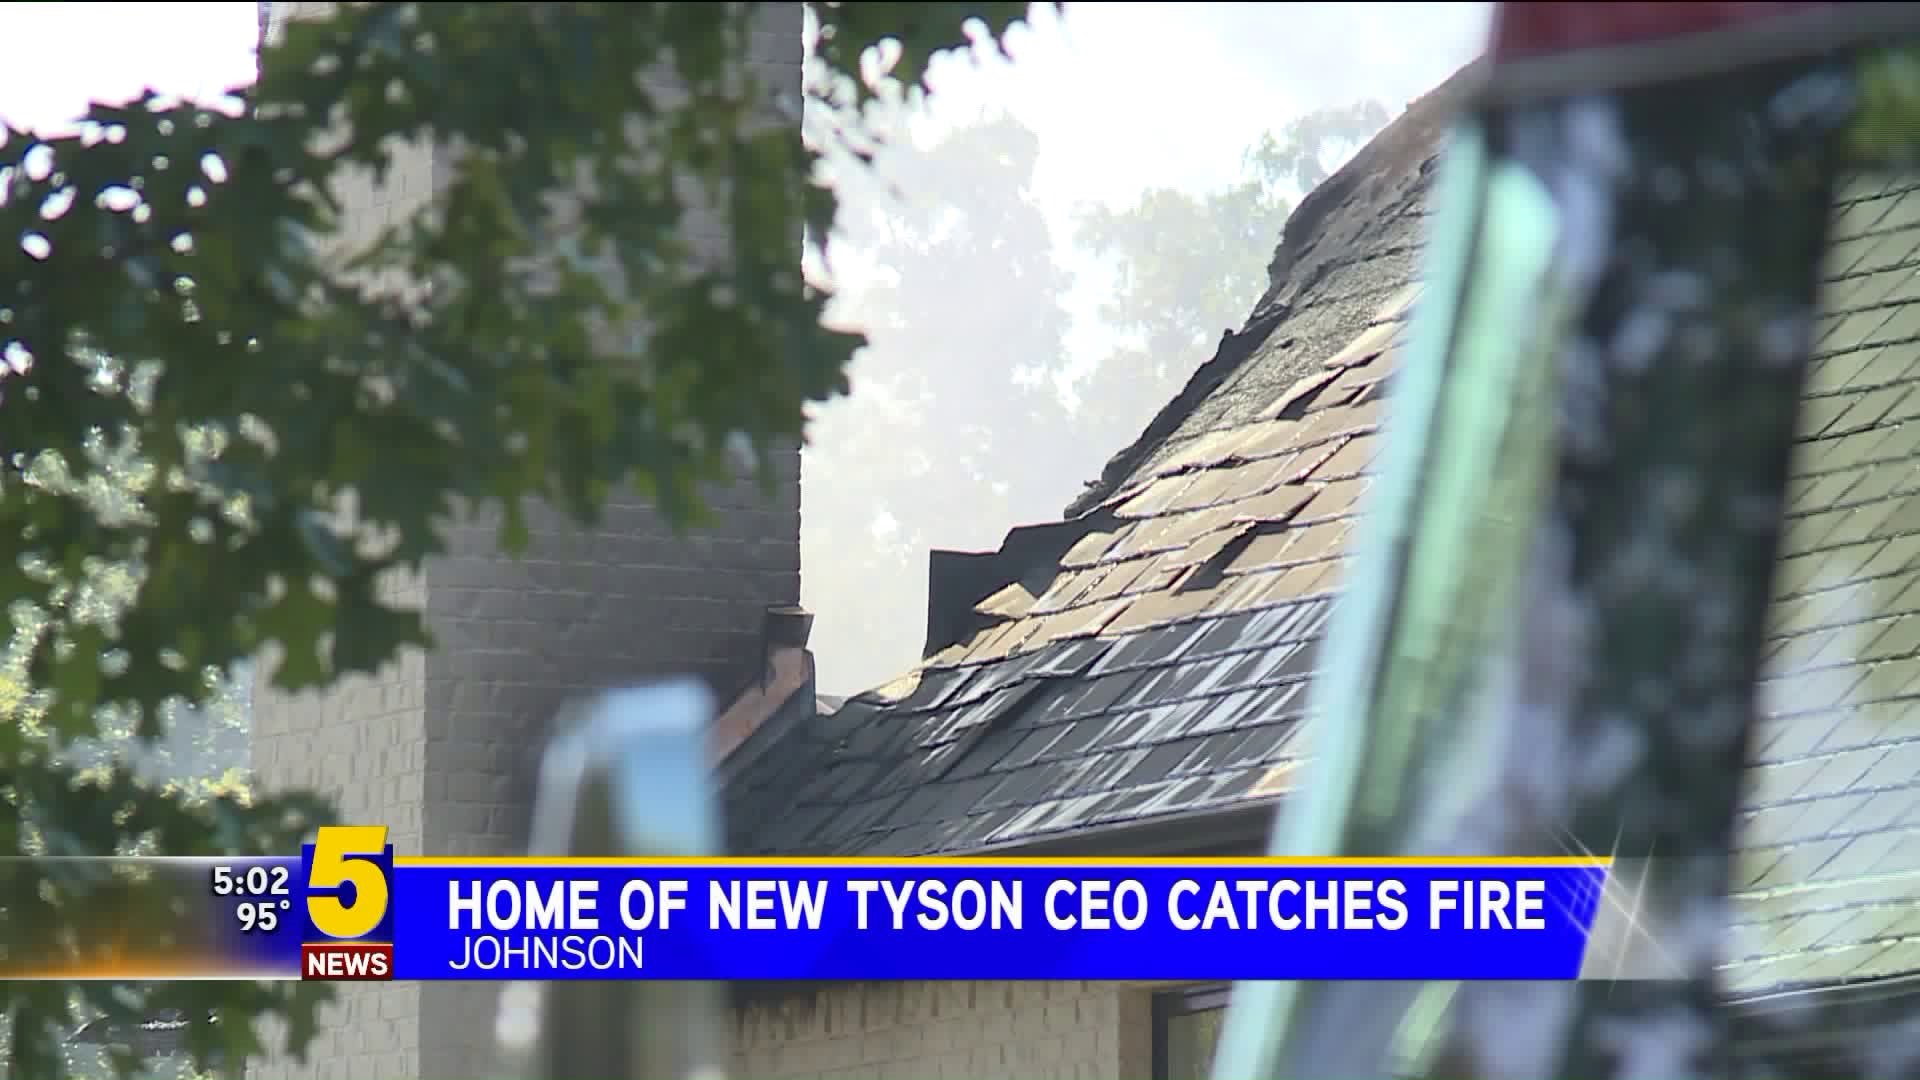 Home Of New Tyson CEO Catches Fire